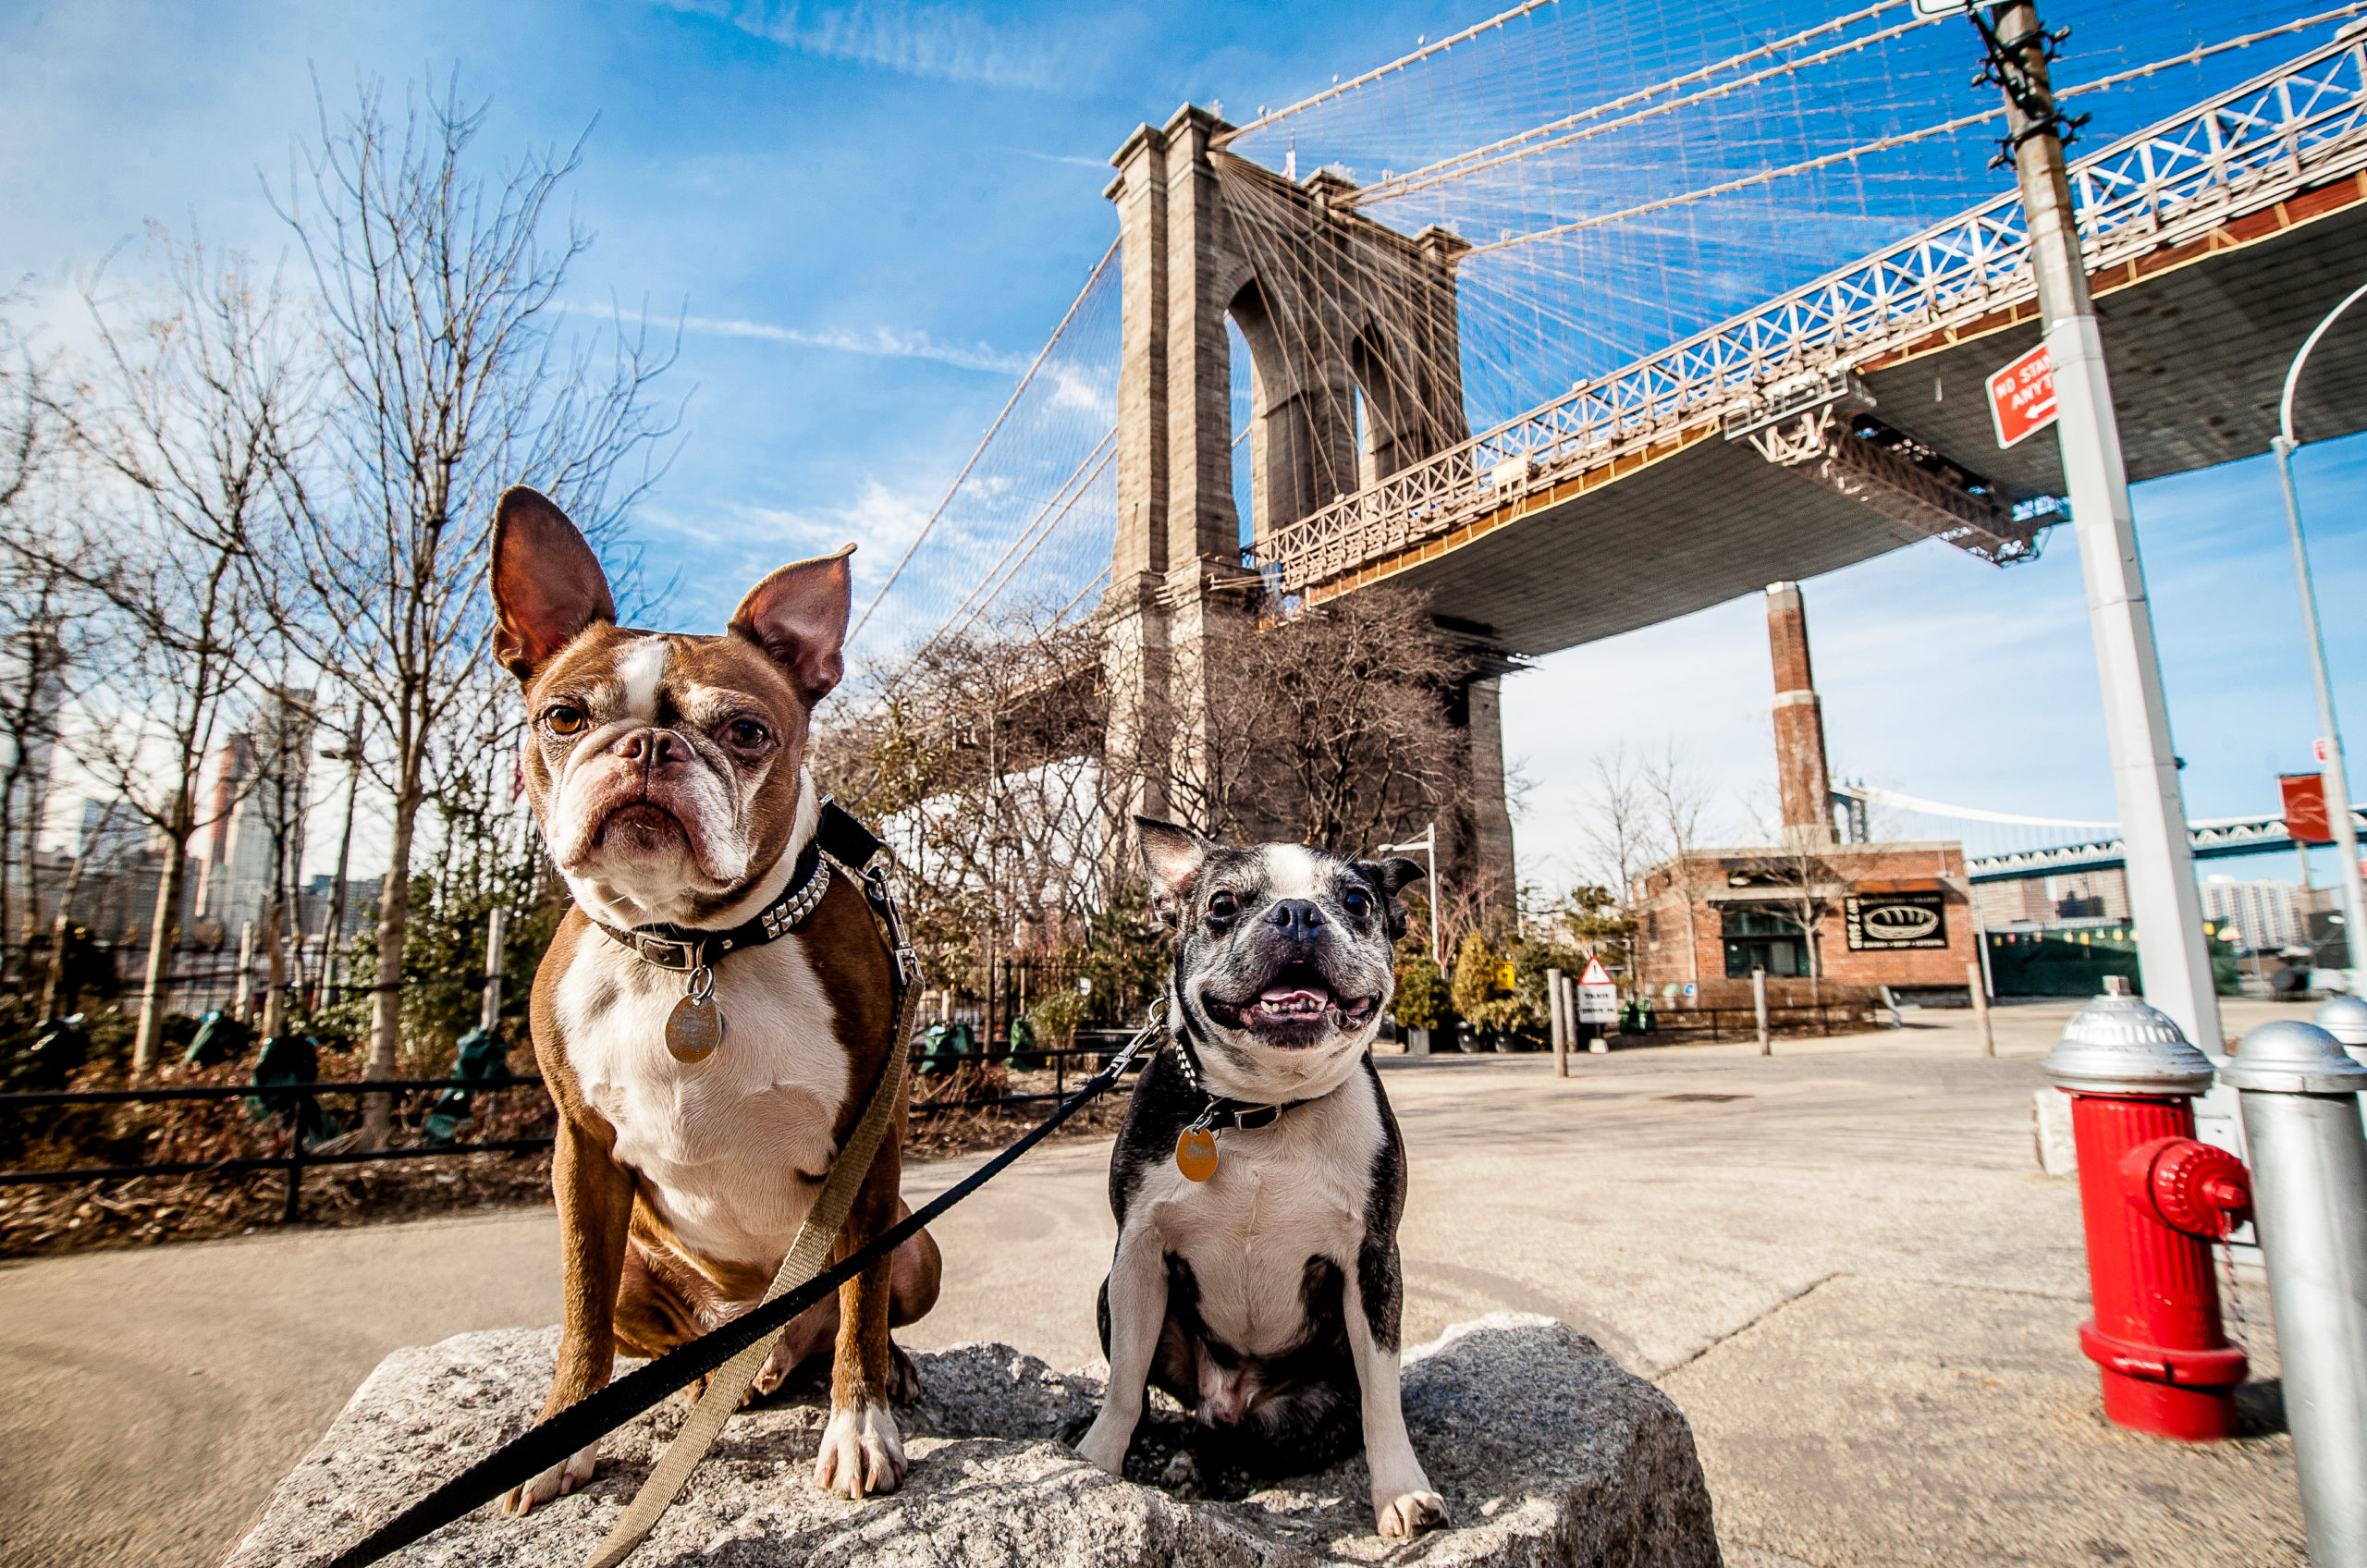 Two dogs sitting on a rock in front of the Brooklyn Bridge, New York City.